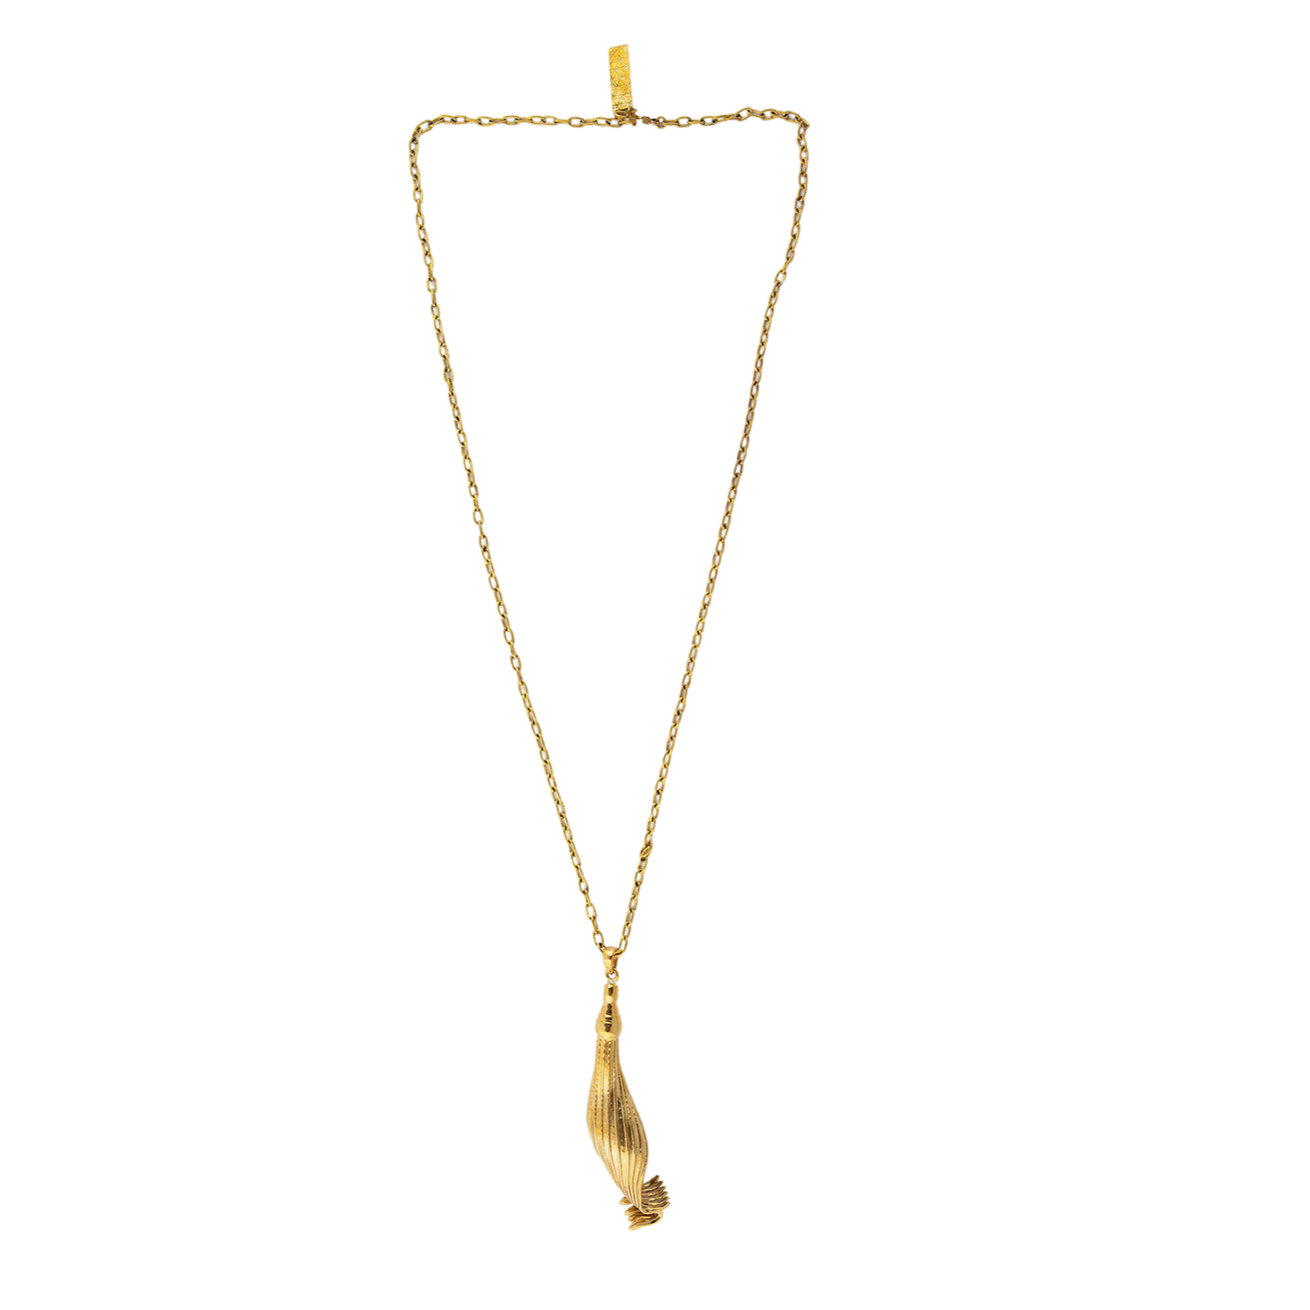 Totomoto Pendant Kangaroo Paw 1, Curved with 80cm Chain